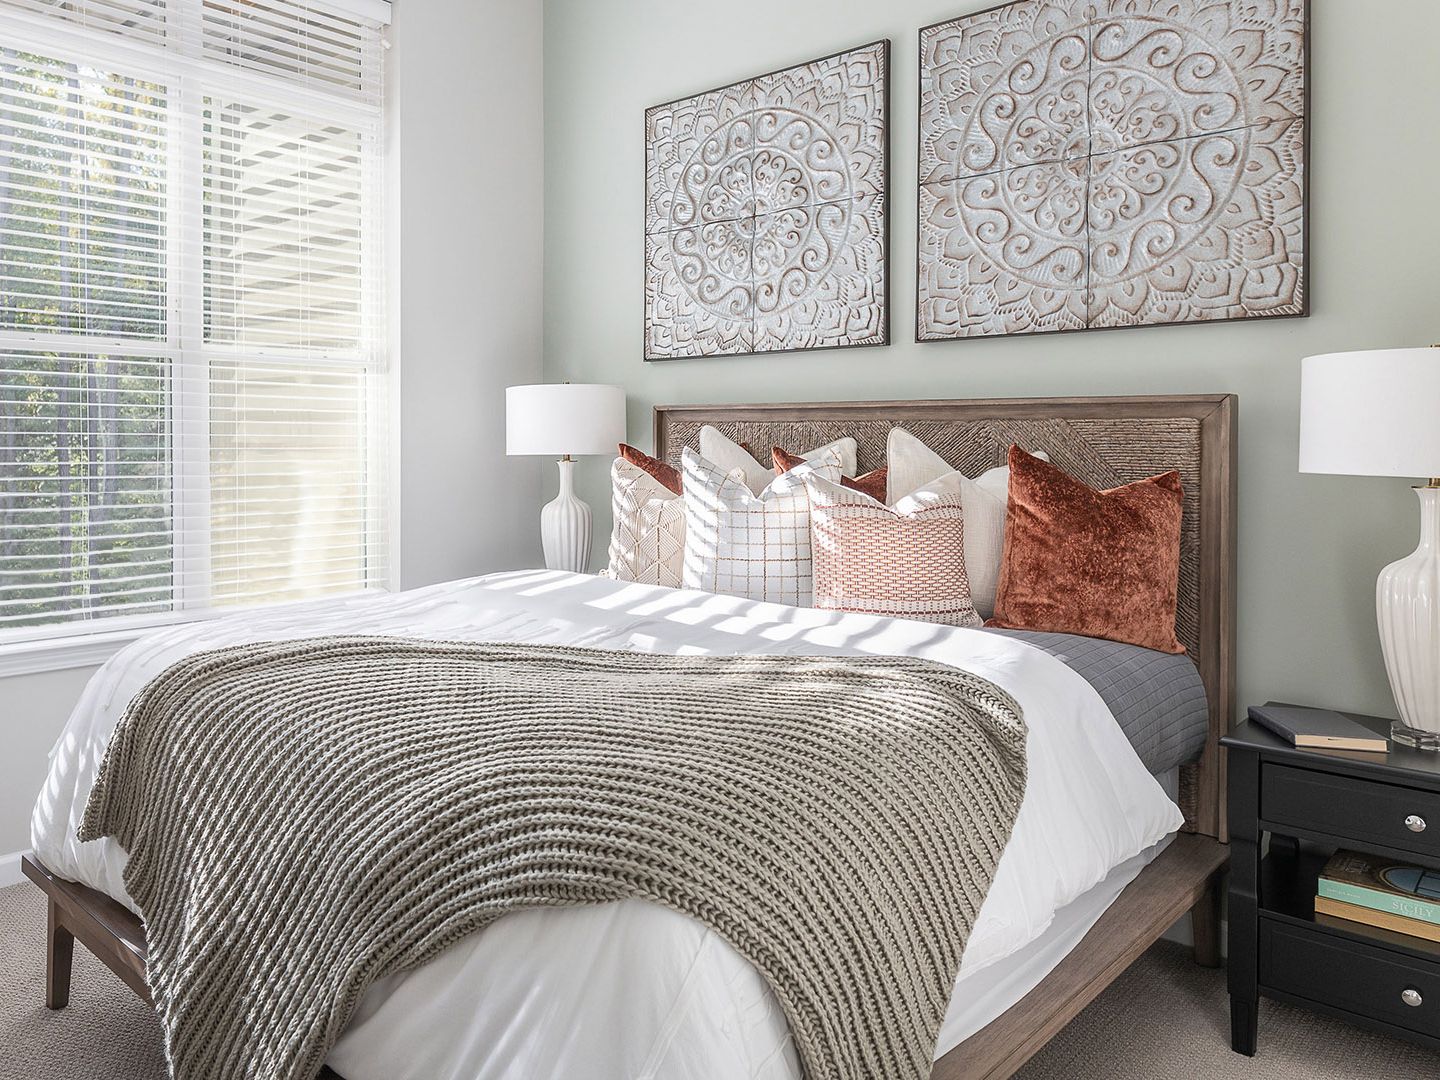 Interior design of a bedroom at Atria Draper Place senior living community with bed, furniture, and decor.